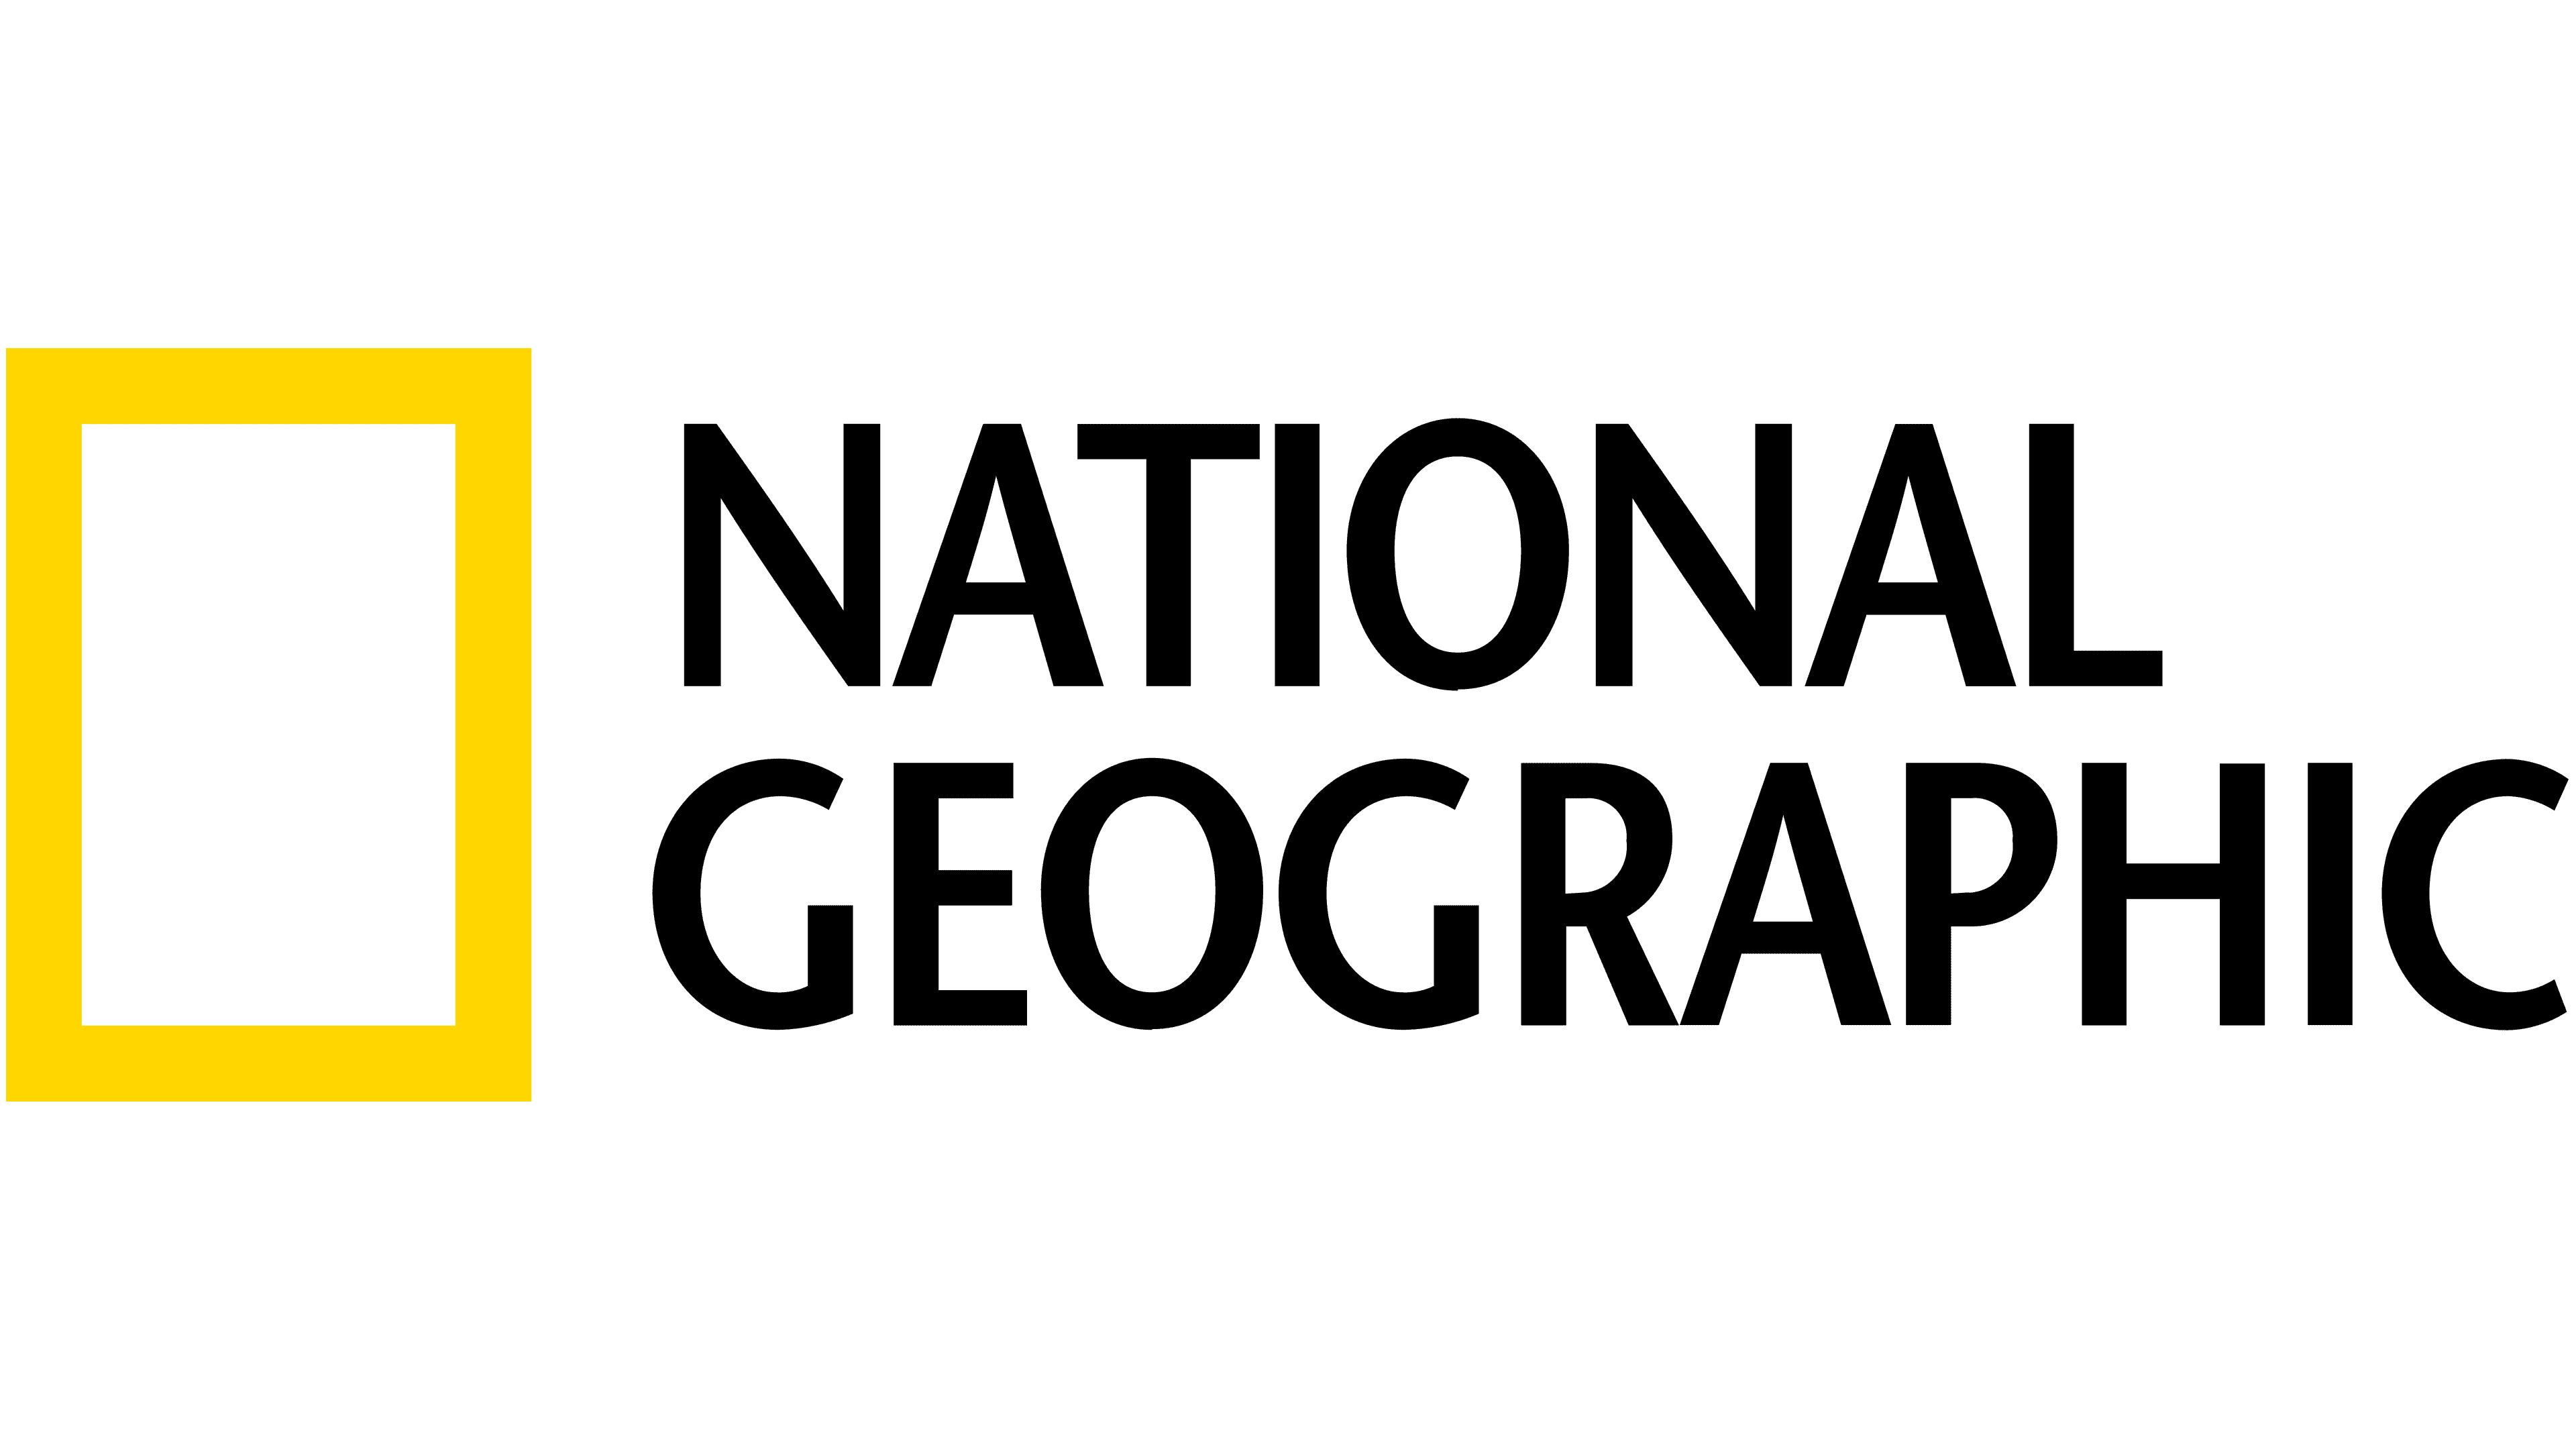 https://1000logos.net/wp-content/uploads/2021/04/National-Geographic-logo.png